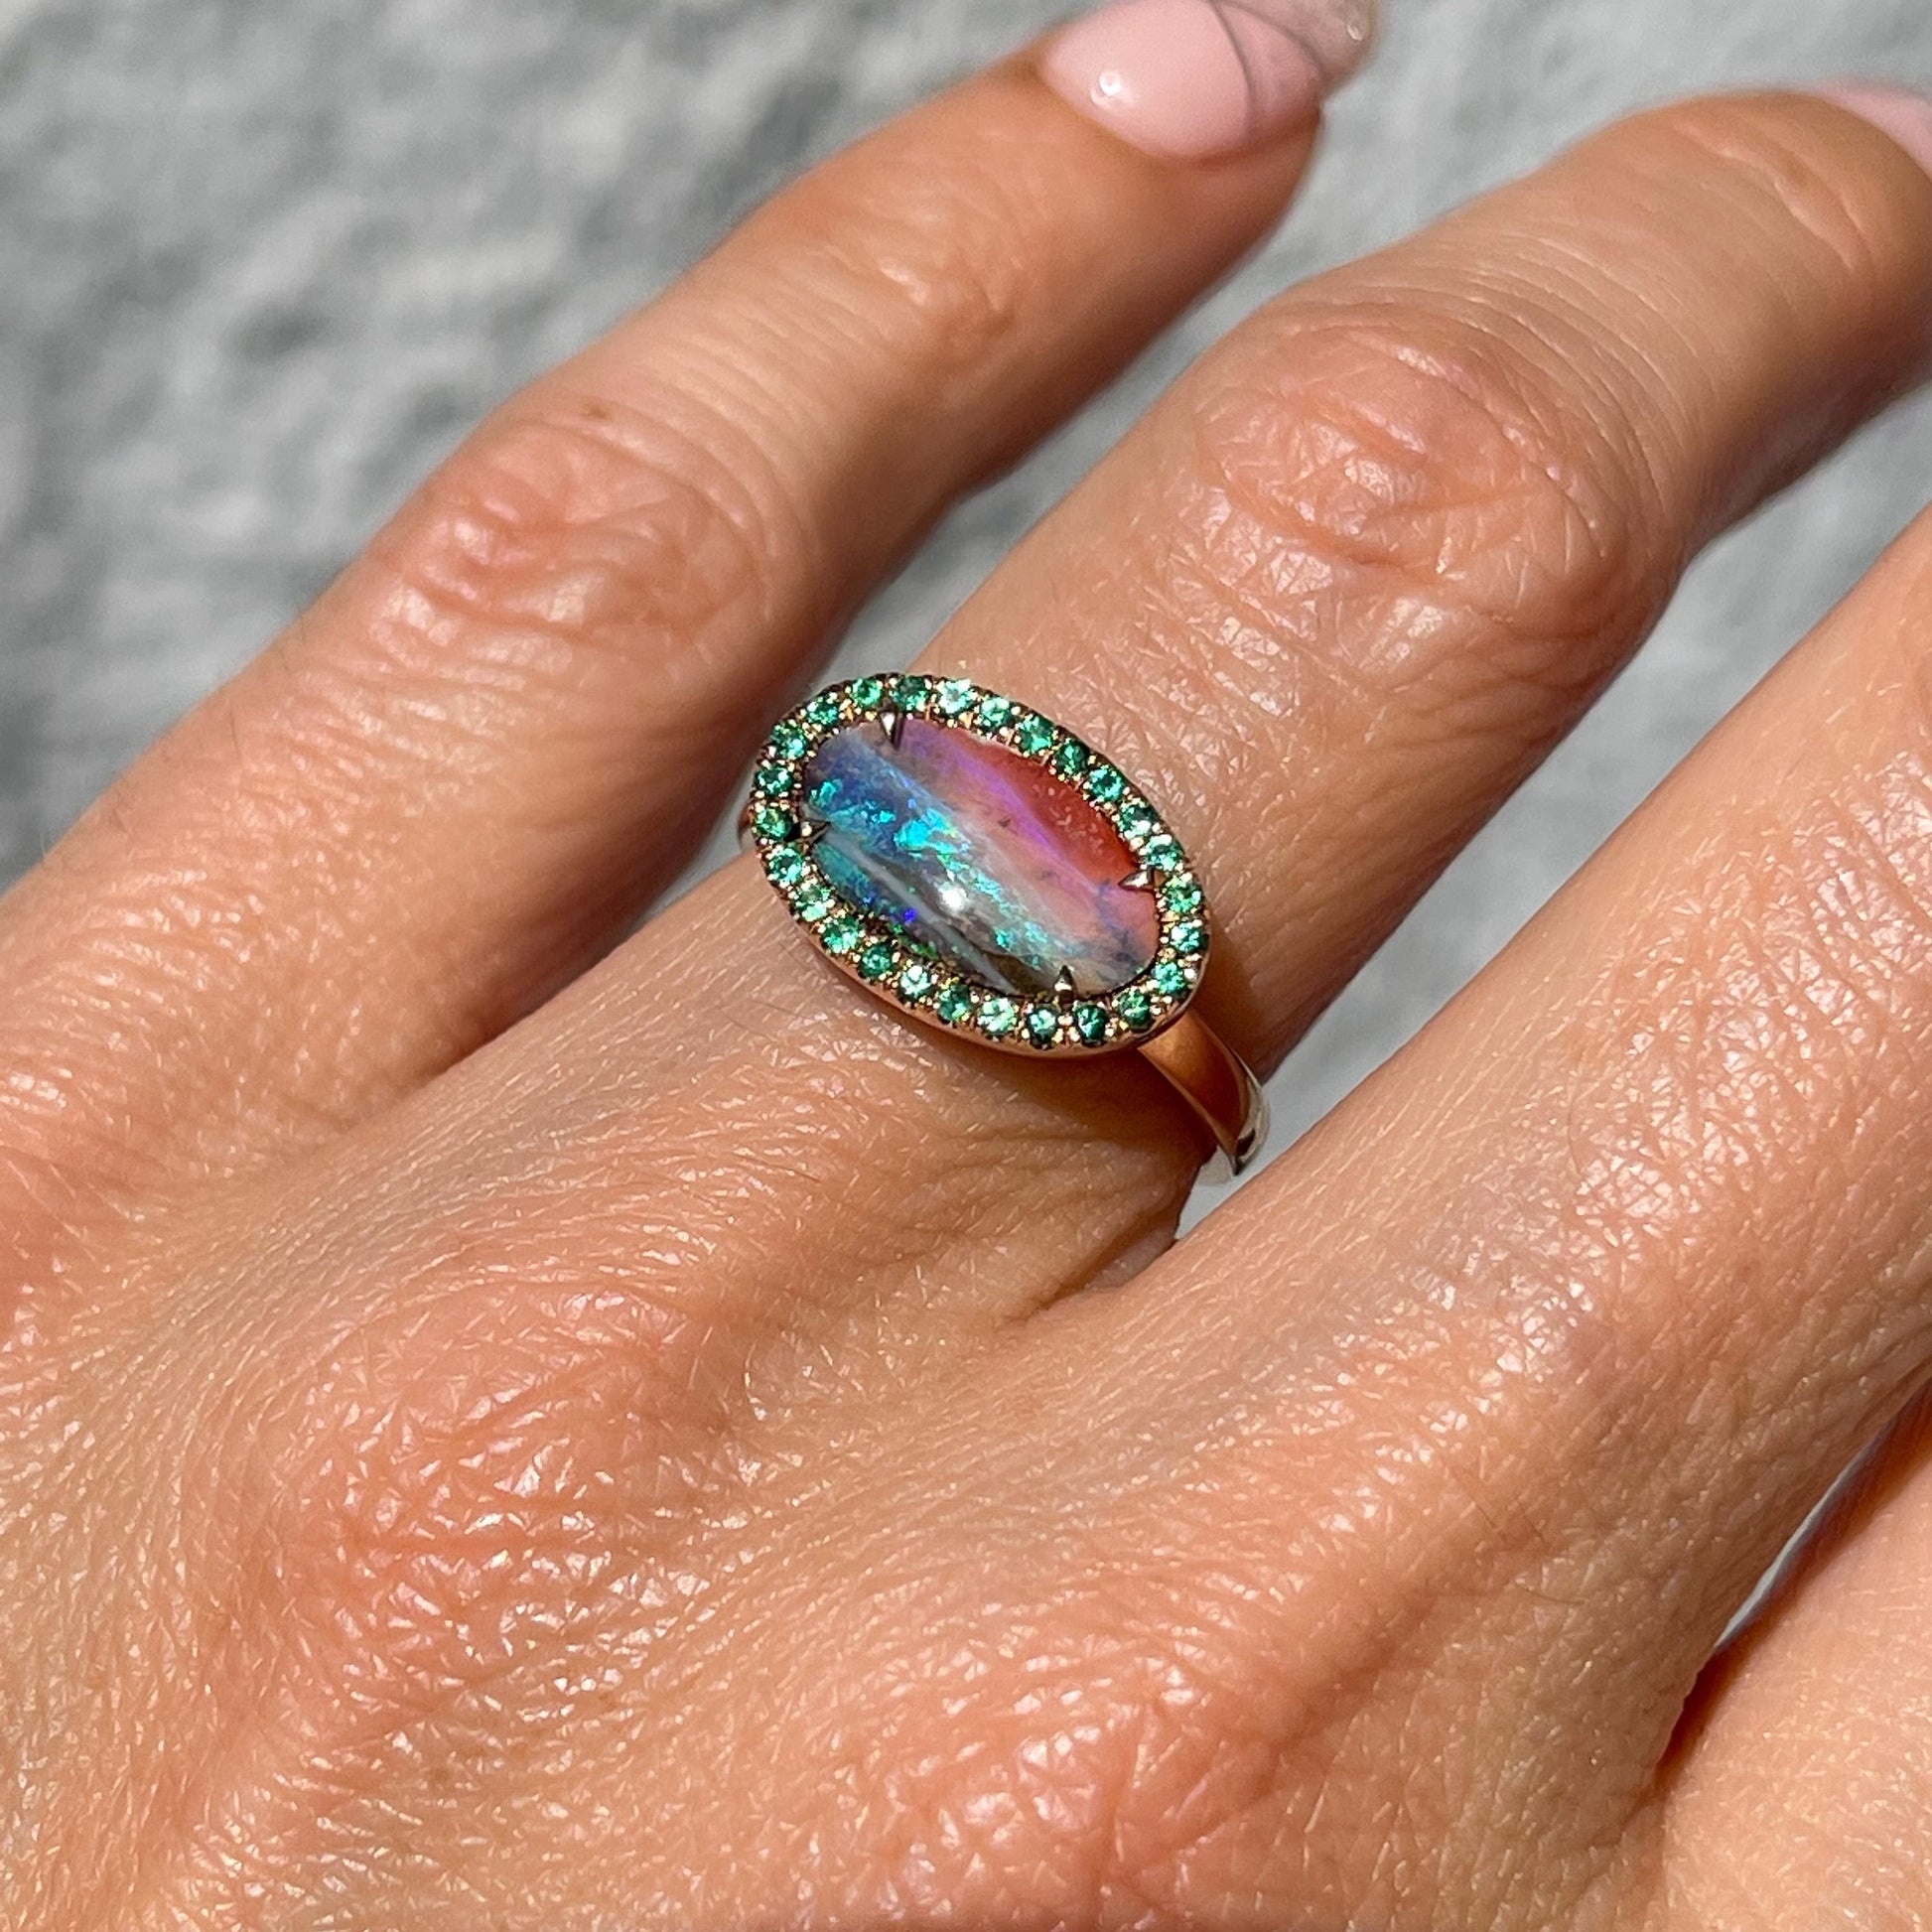 Australian Opal and Emerald Ring by NIXIN Jewelry by NIXIN Jewelry modeled on hand in direct sunlight. Oval opal ring.